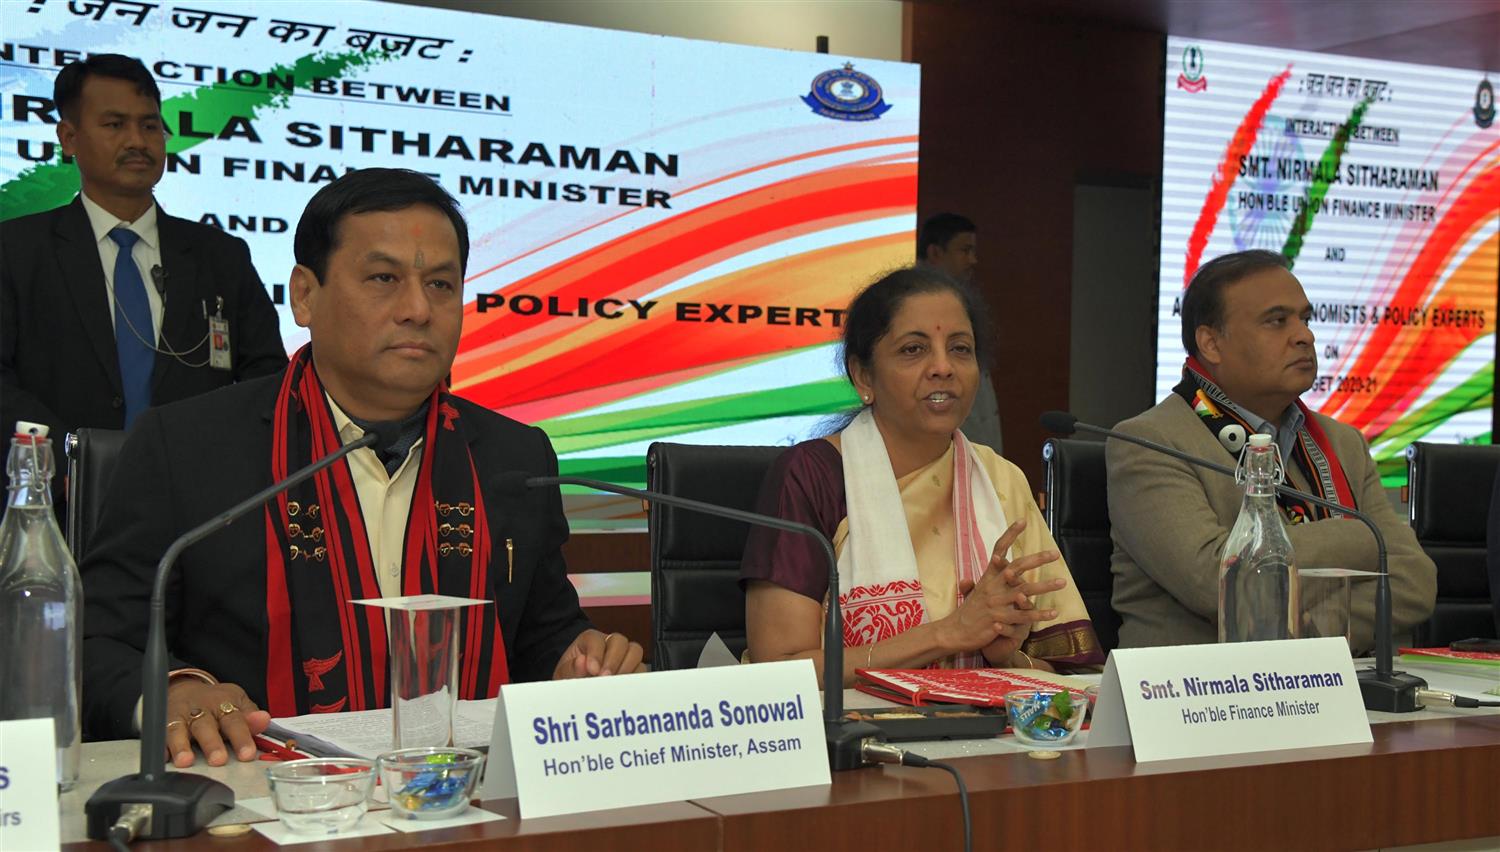 Union Minister of Finance & Corporate Affairs Smt. Nirmala Sitharaman, Interacting with Academicians, Economist & Policy Experts at Assam Administrative Staff College Guwahati on 27th February 2020.Chief Minister of Assam Shri Sarbananda Sonowal and Shri   Himanta Biswa Sarma, Finance Minister of Assam are also seen in the picture.

